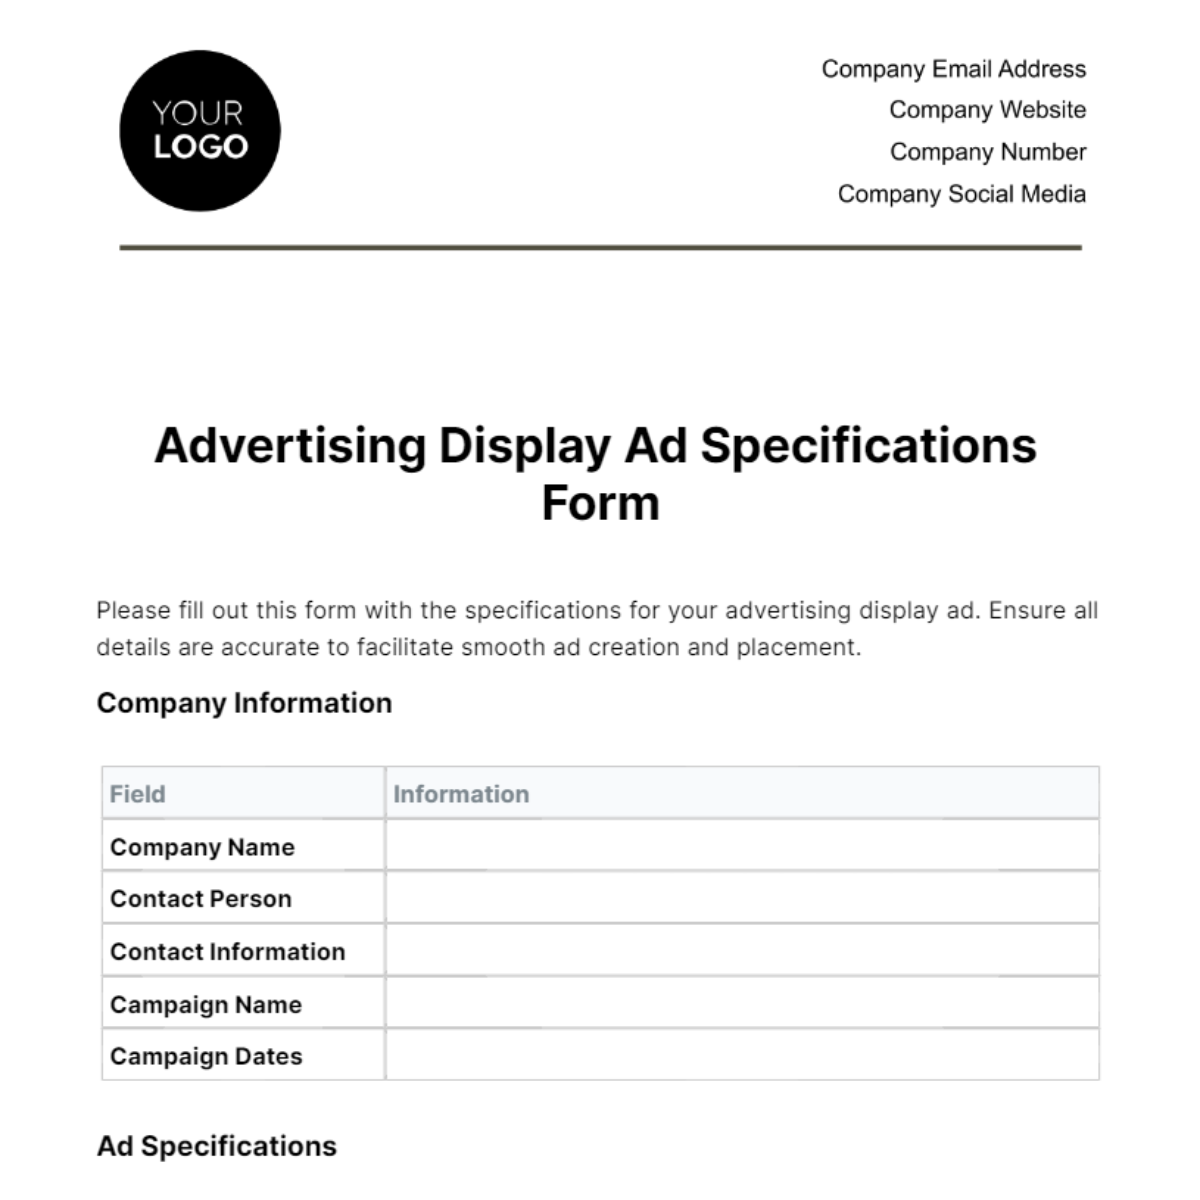 Advertising Display Ad Specifications Form Template